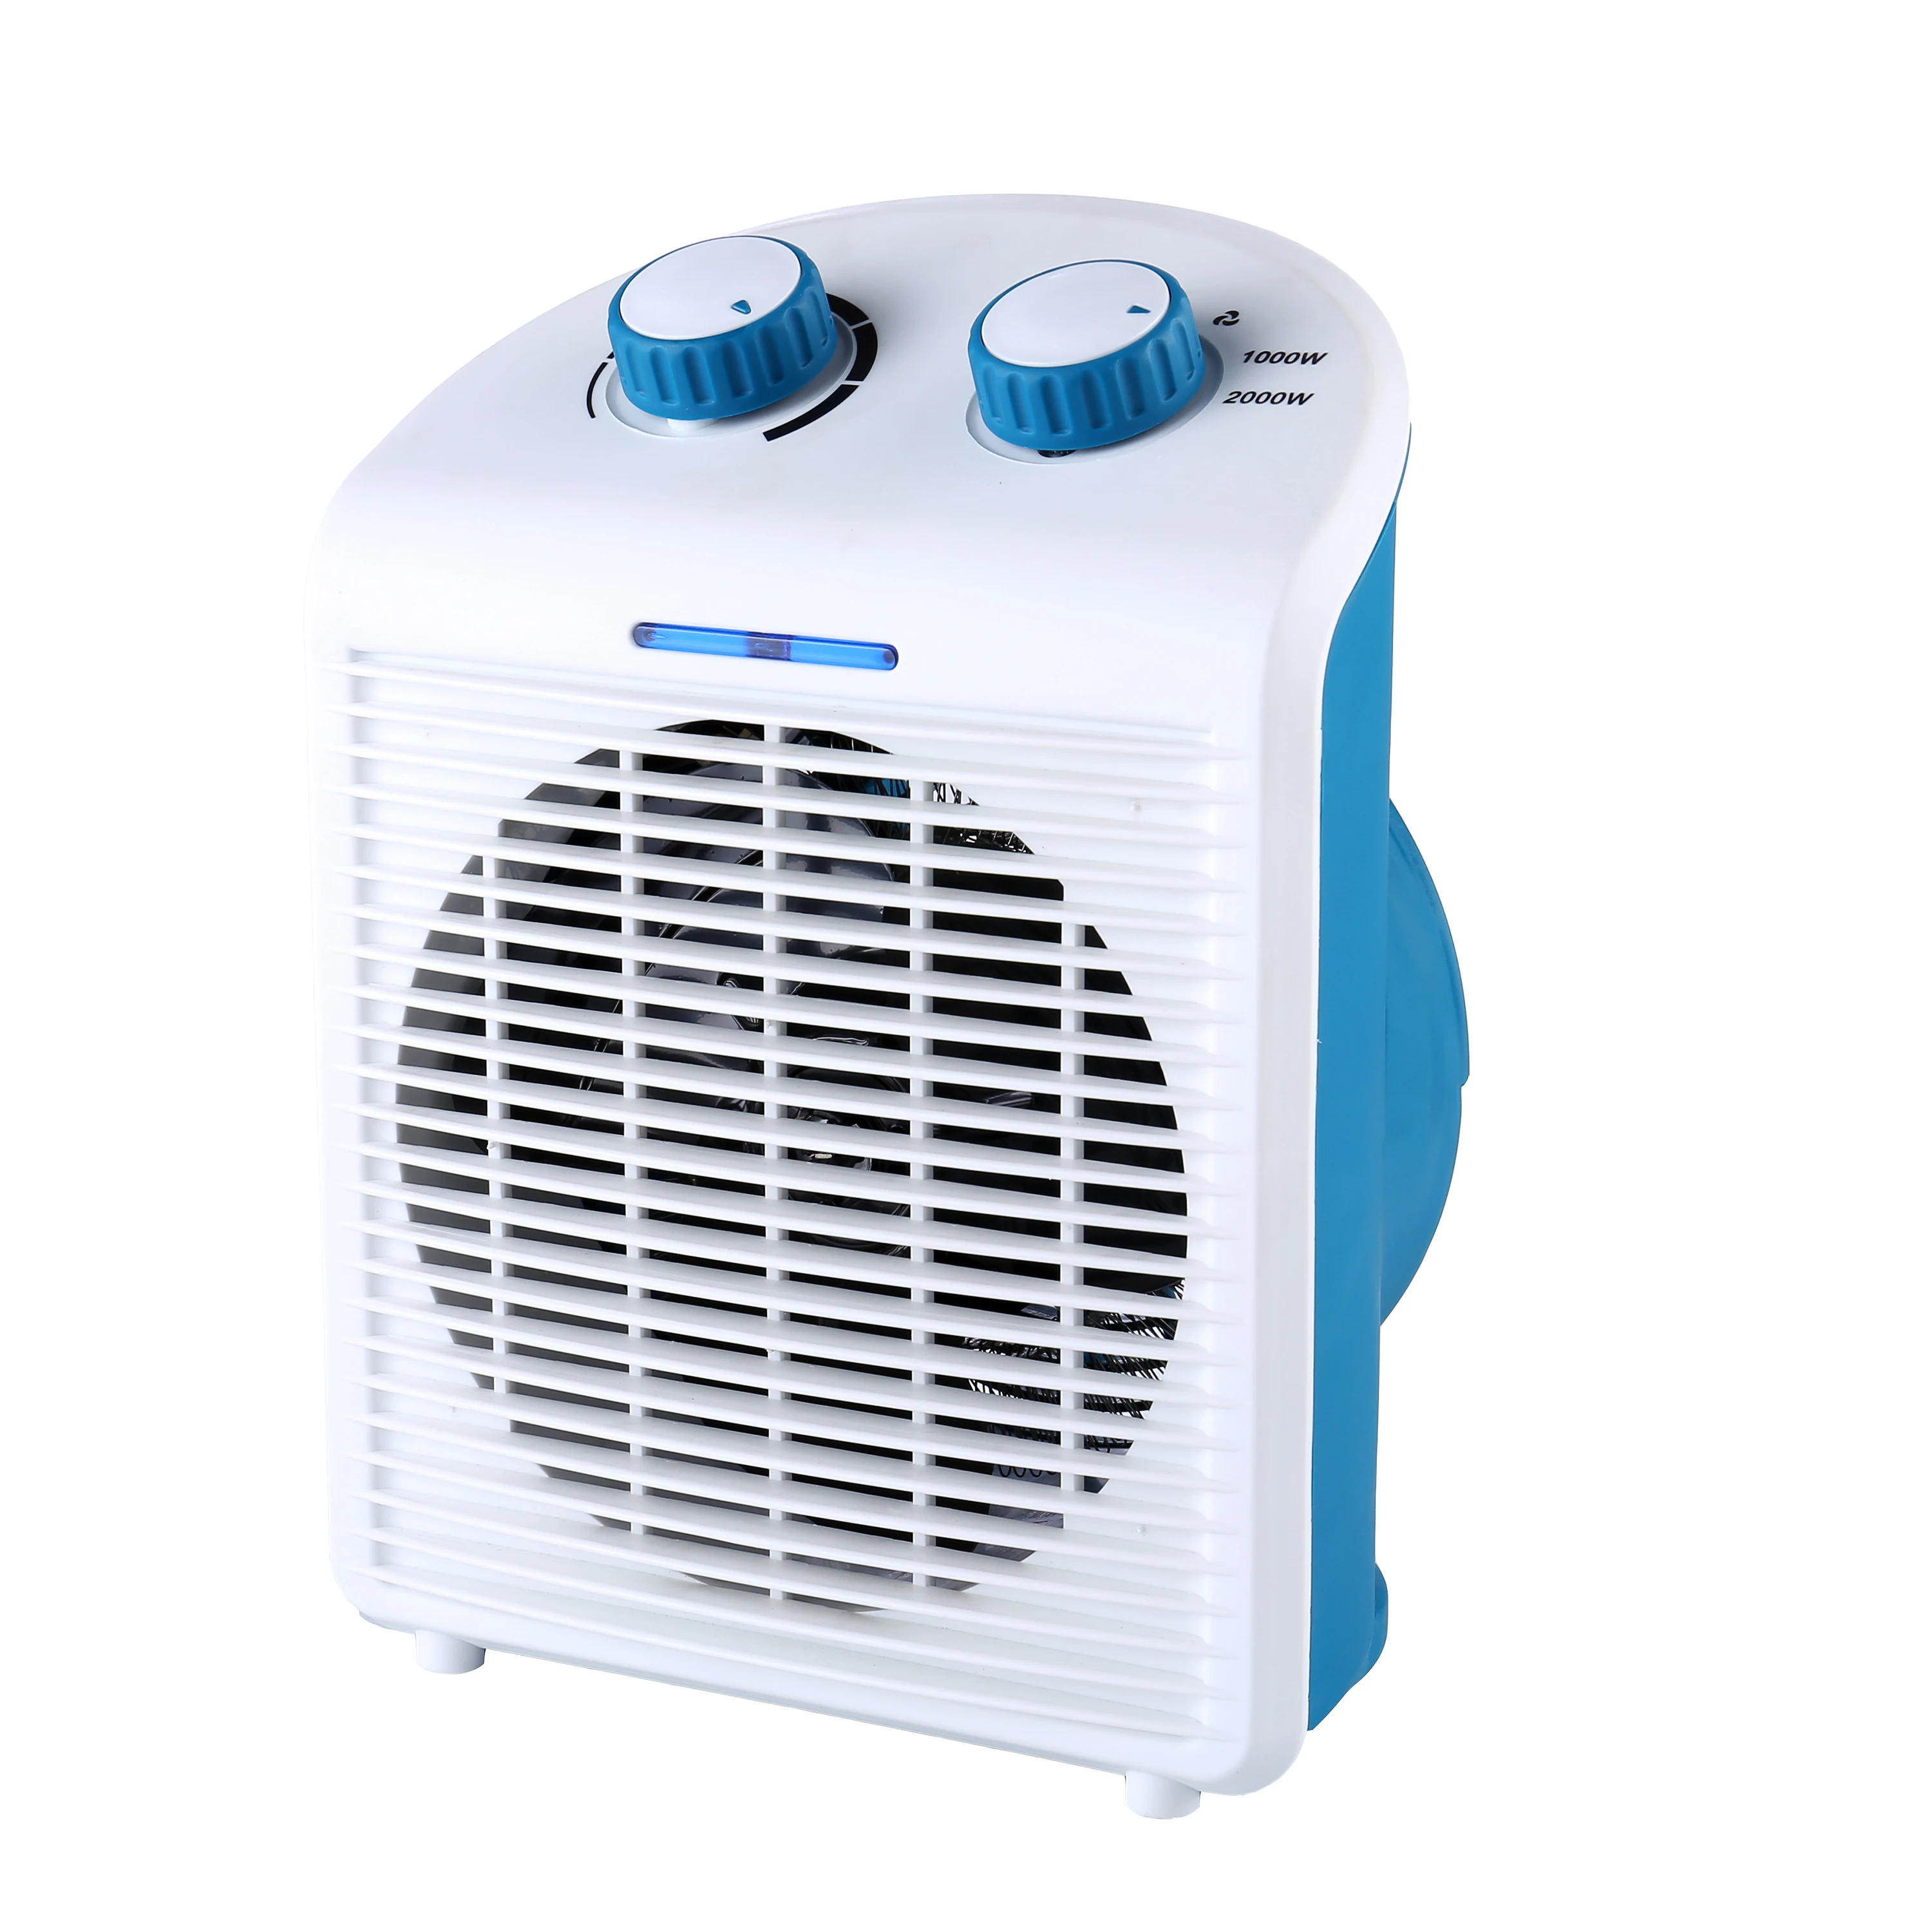 Hot Sale Home Heaters Electric Small Portable Electric Room Heaters - Buy Room Heater Fan,Heater Electric Fan,Electric Heater Product on Alibaba.com